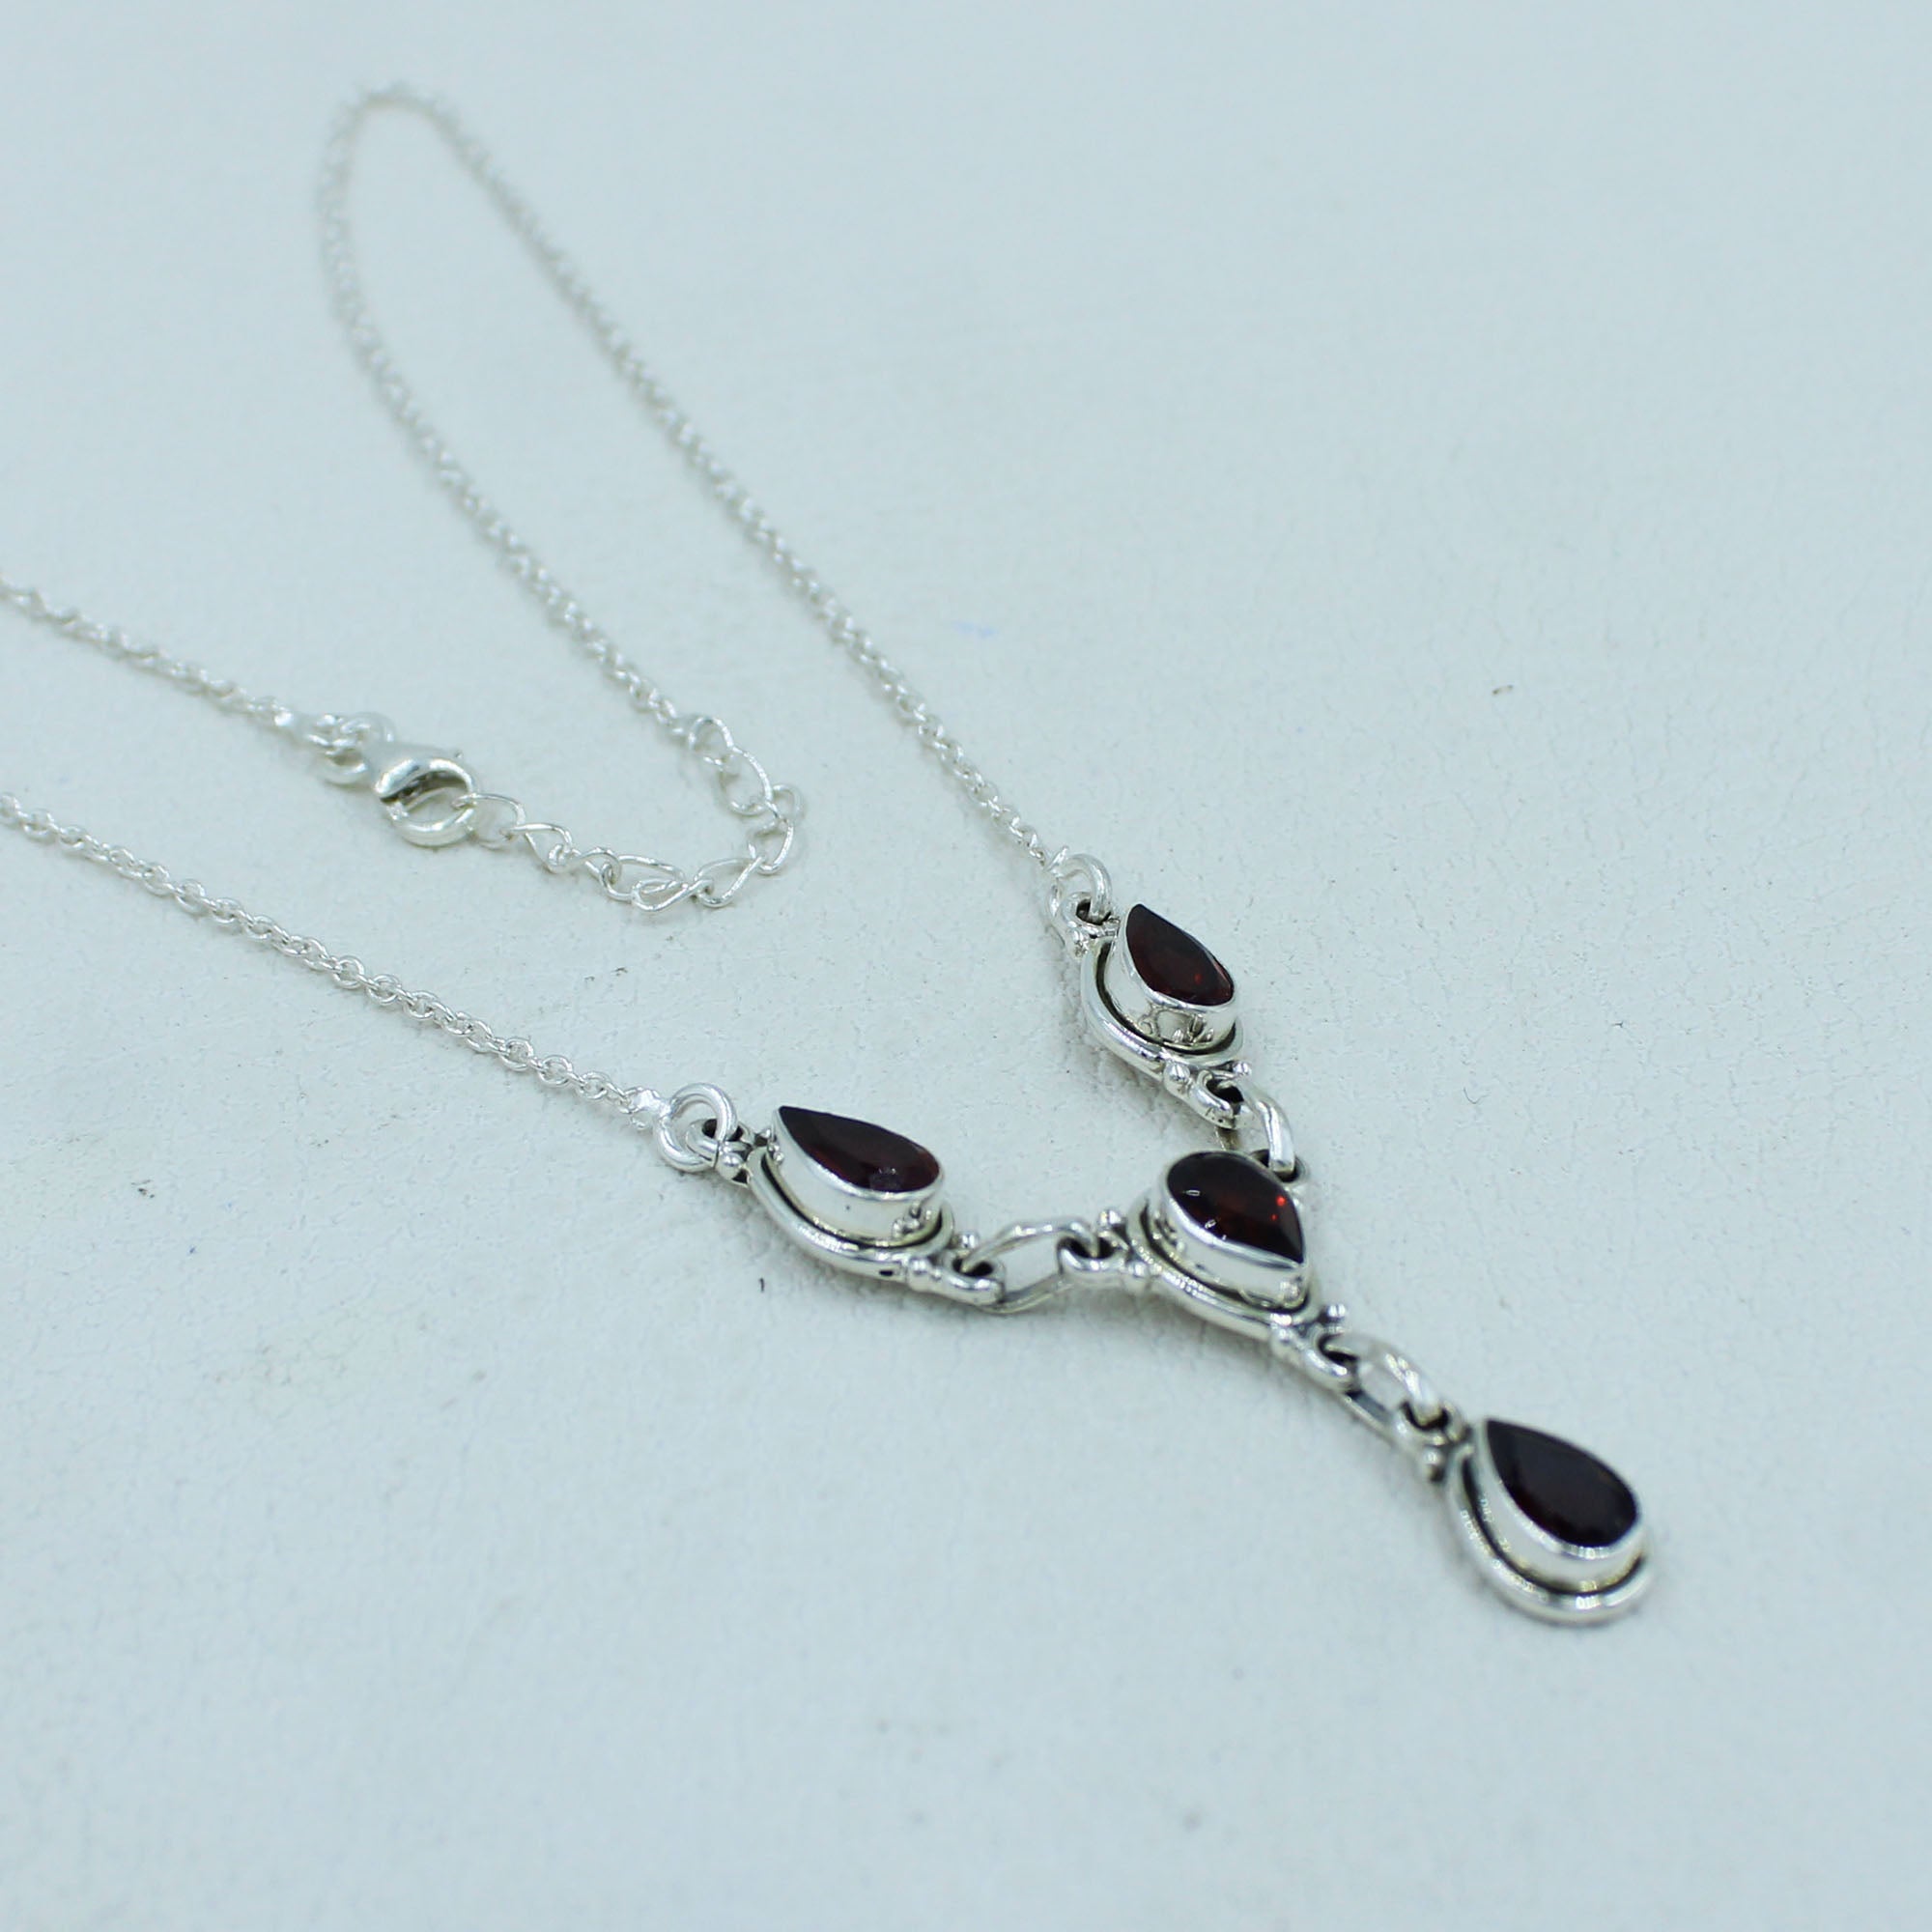 Natural Garnet Delightful Jewelry Necklace in Sterling Silver